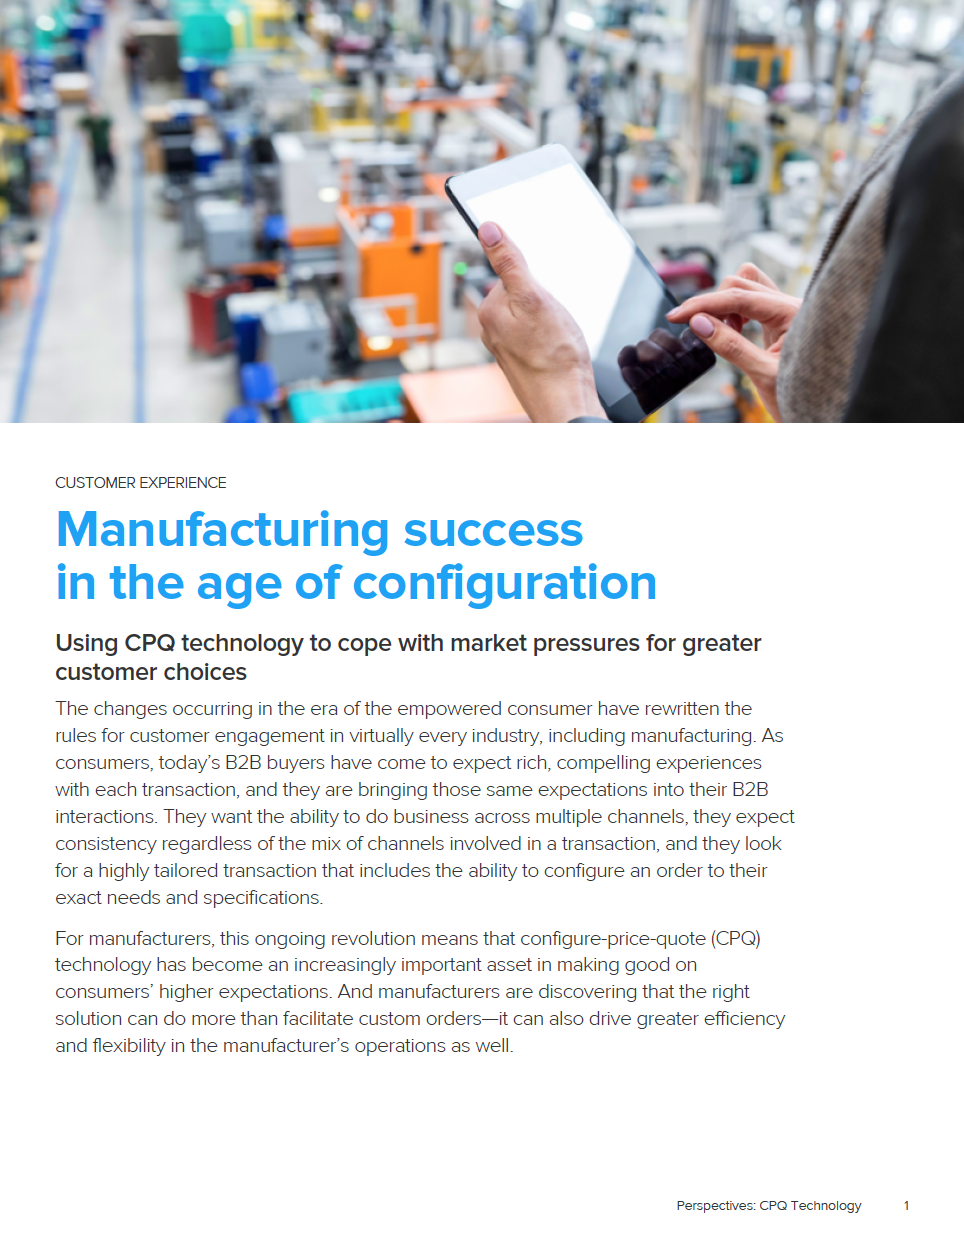 Manufacturing Success in the Age of Configuration